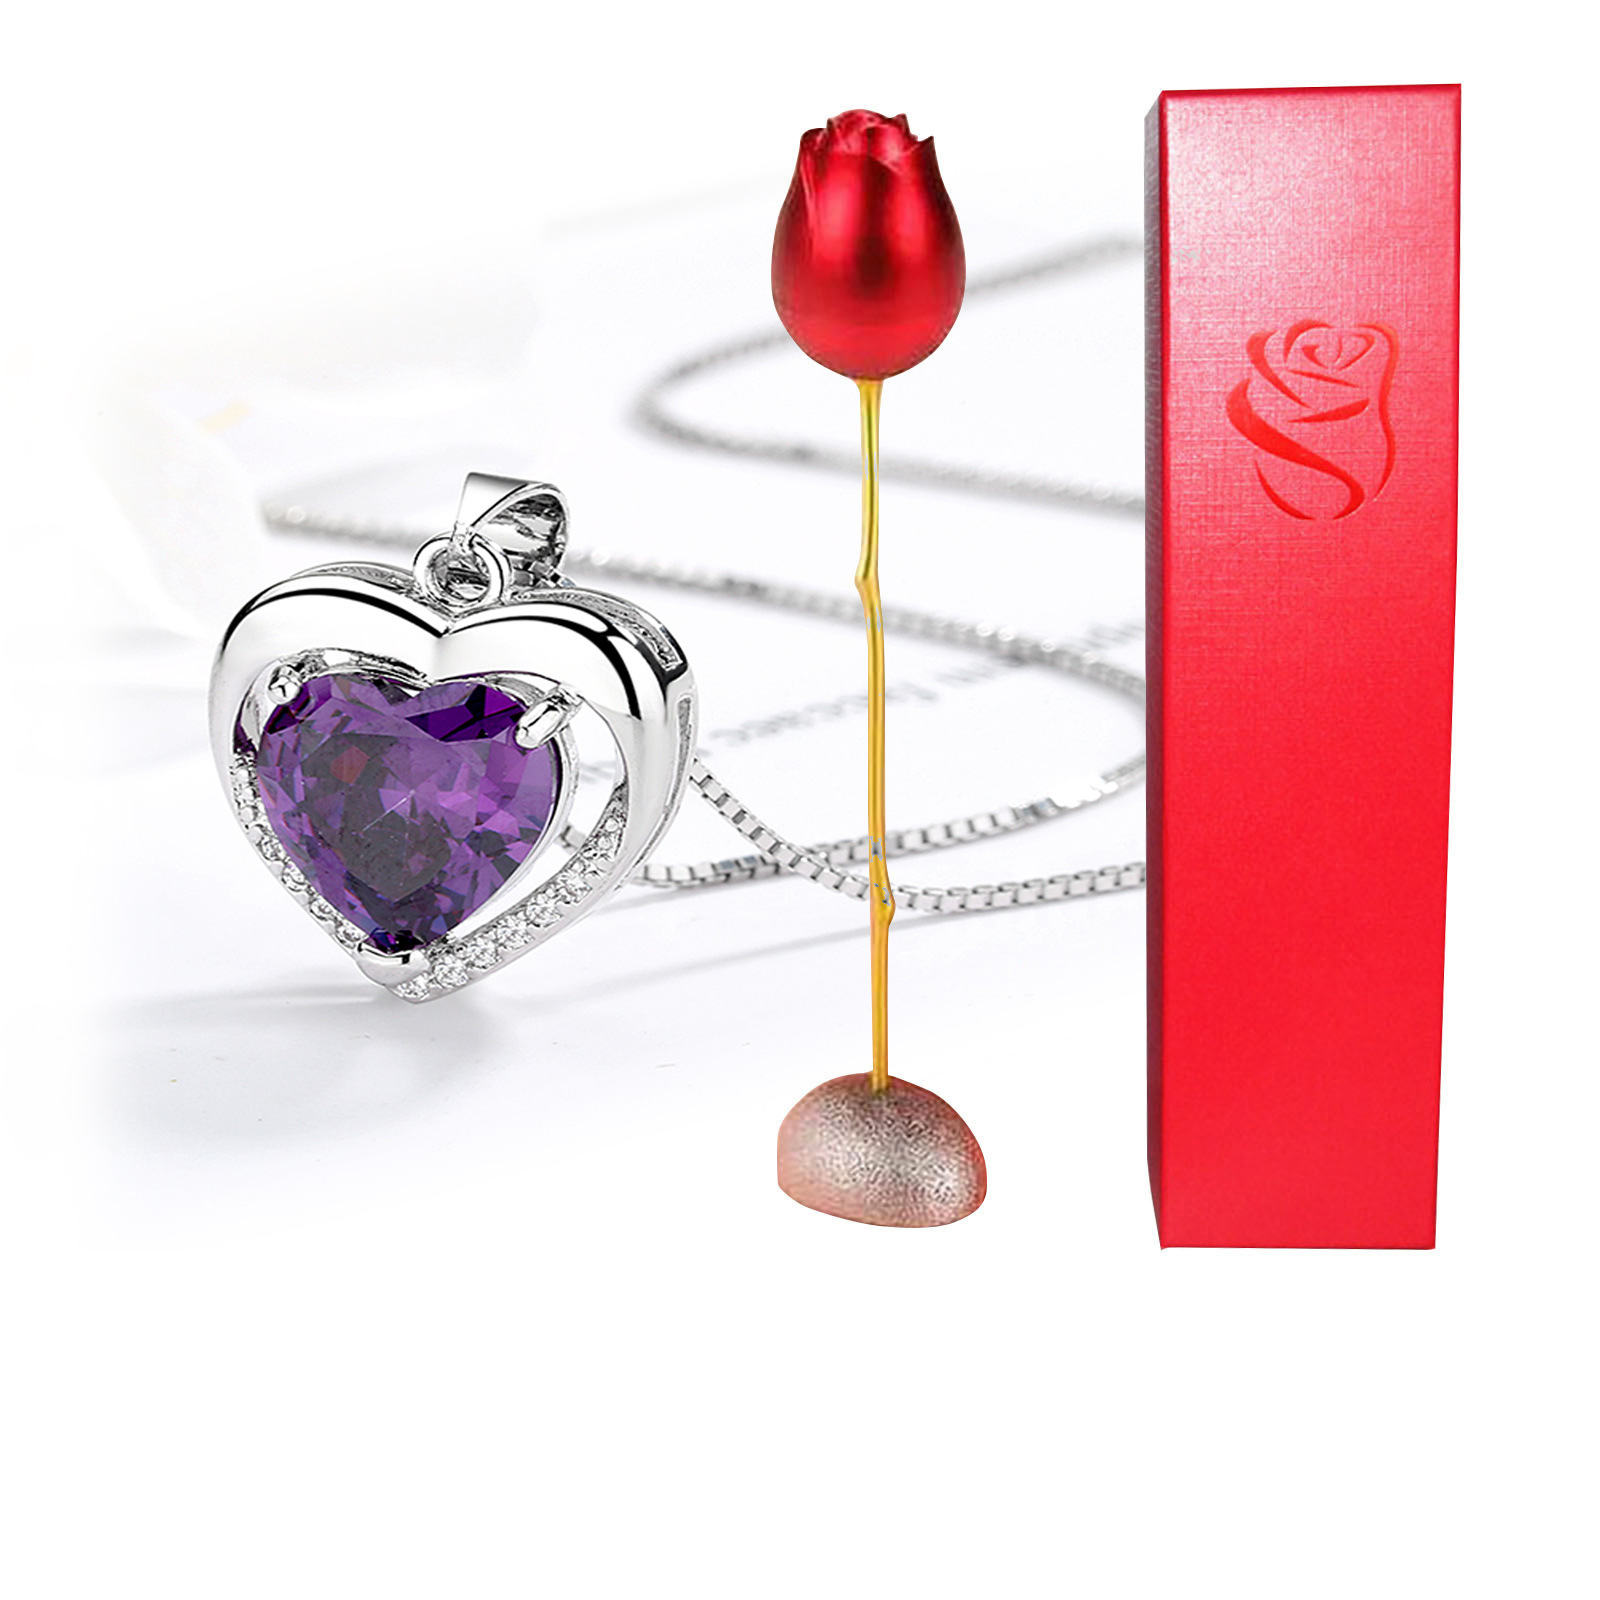 Rose and Pendant Gift Pack 12